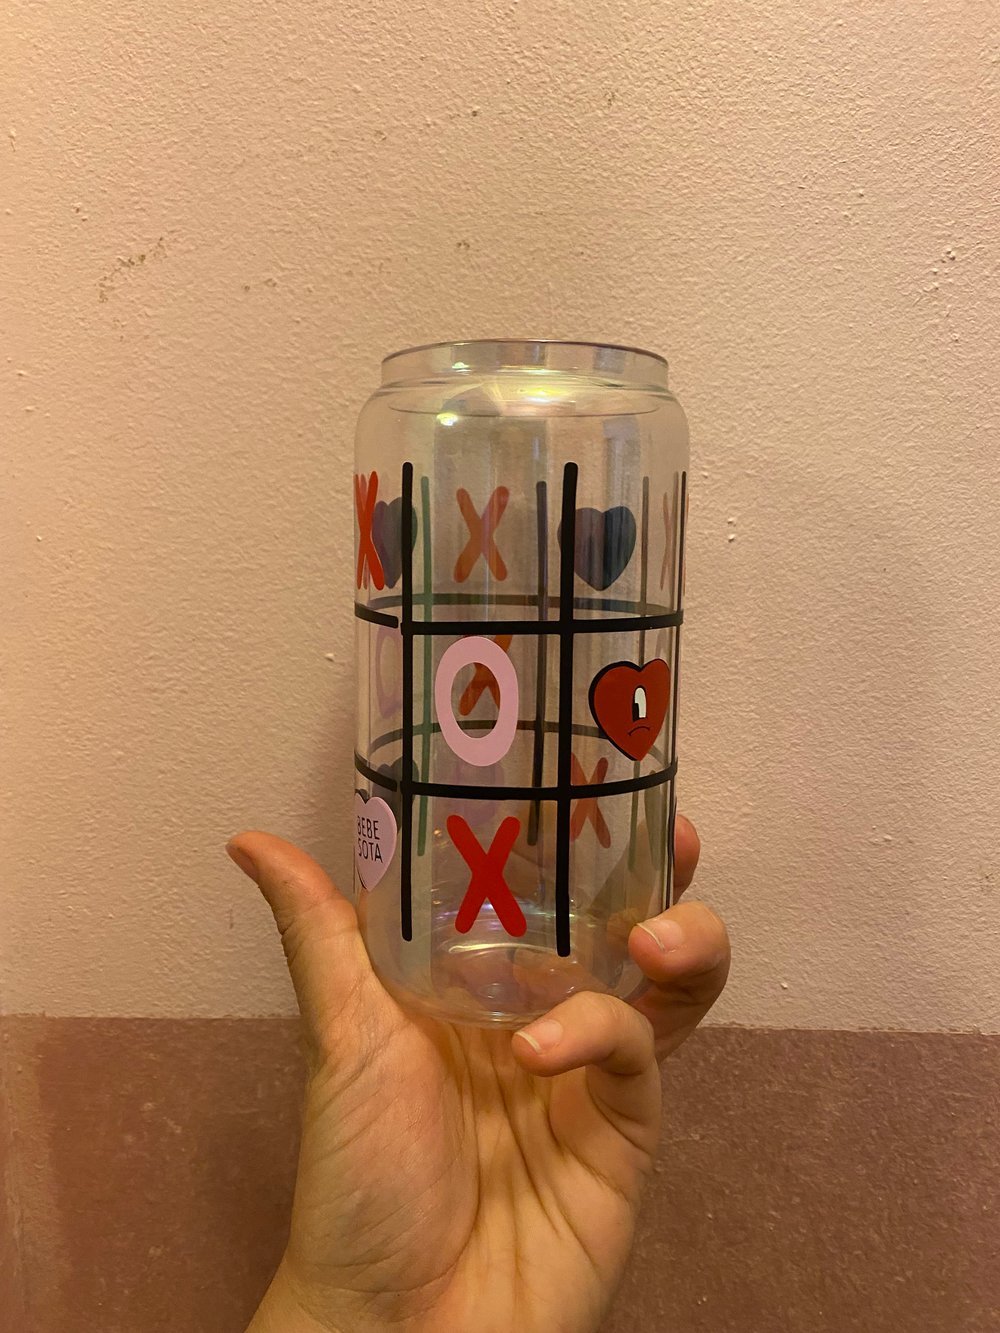 https://assets.bigcartel.com/product_images/d4f8d649-e54c-4476-a49c-bc452e0b984e/valentine-day-bad-bunny-inspired-18oz-can-glass.jpg?auto=format&fit=max&w=1000